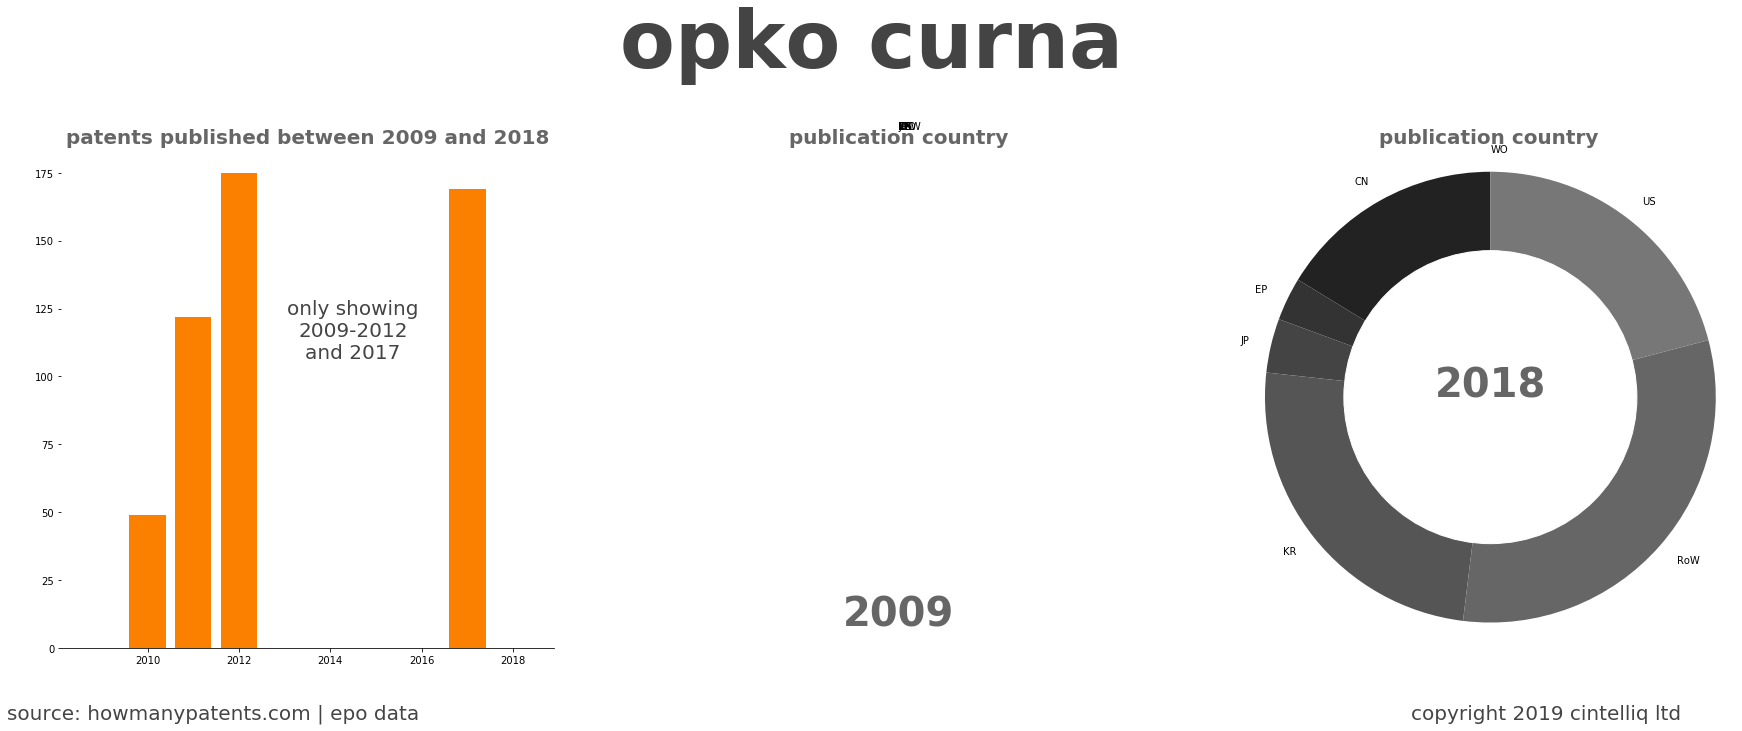 summary of patents for Opko Curna